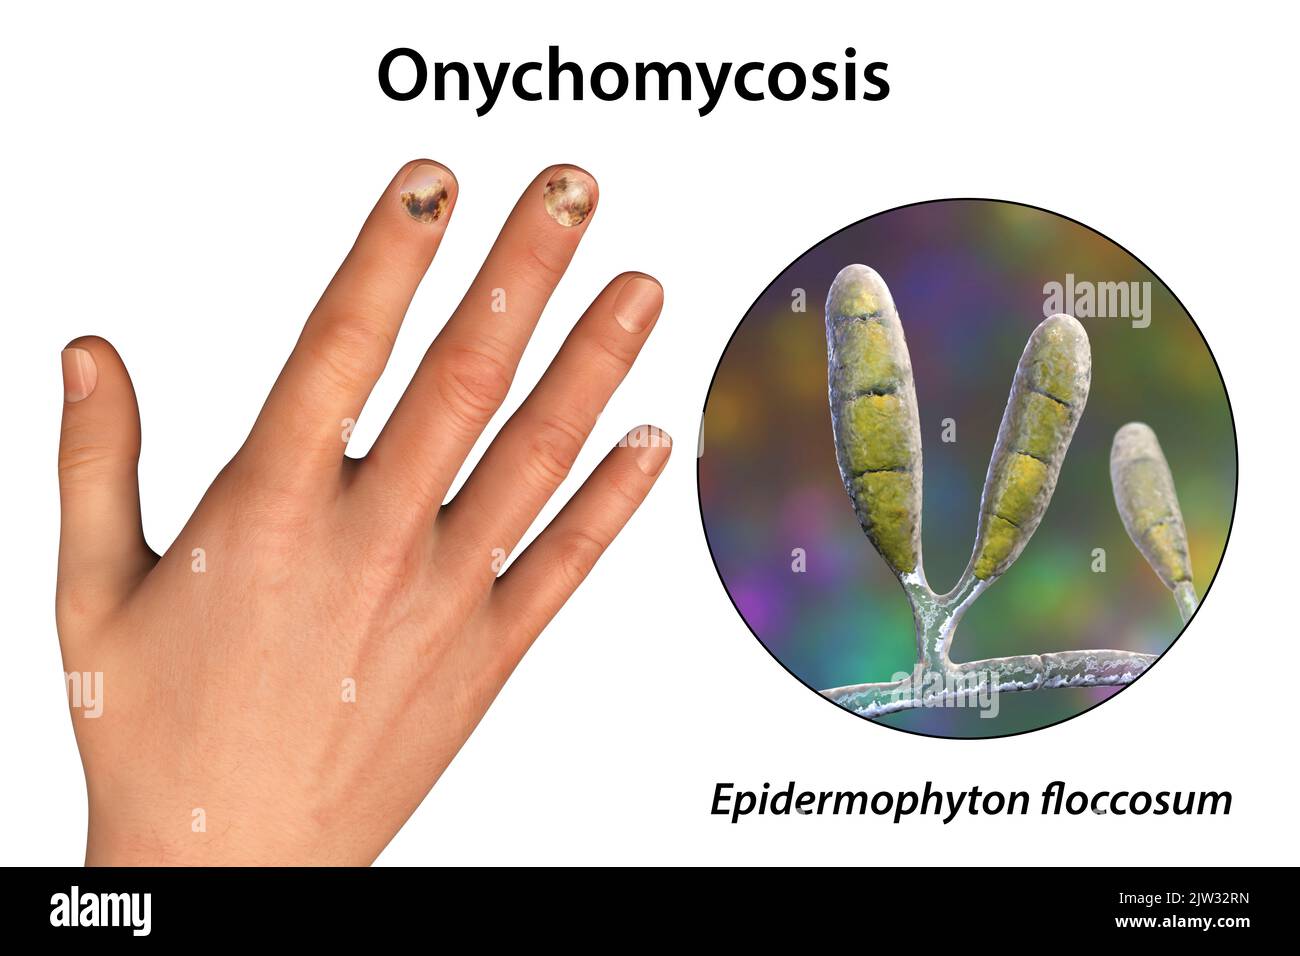 Illustration of a fungal nail infection showing a human hand with onychomycosis and a close-up view of Epidermophyton floccosum fungi, one of the causative agents of nail infections. Stock Photo